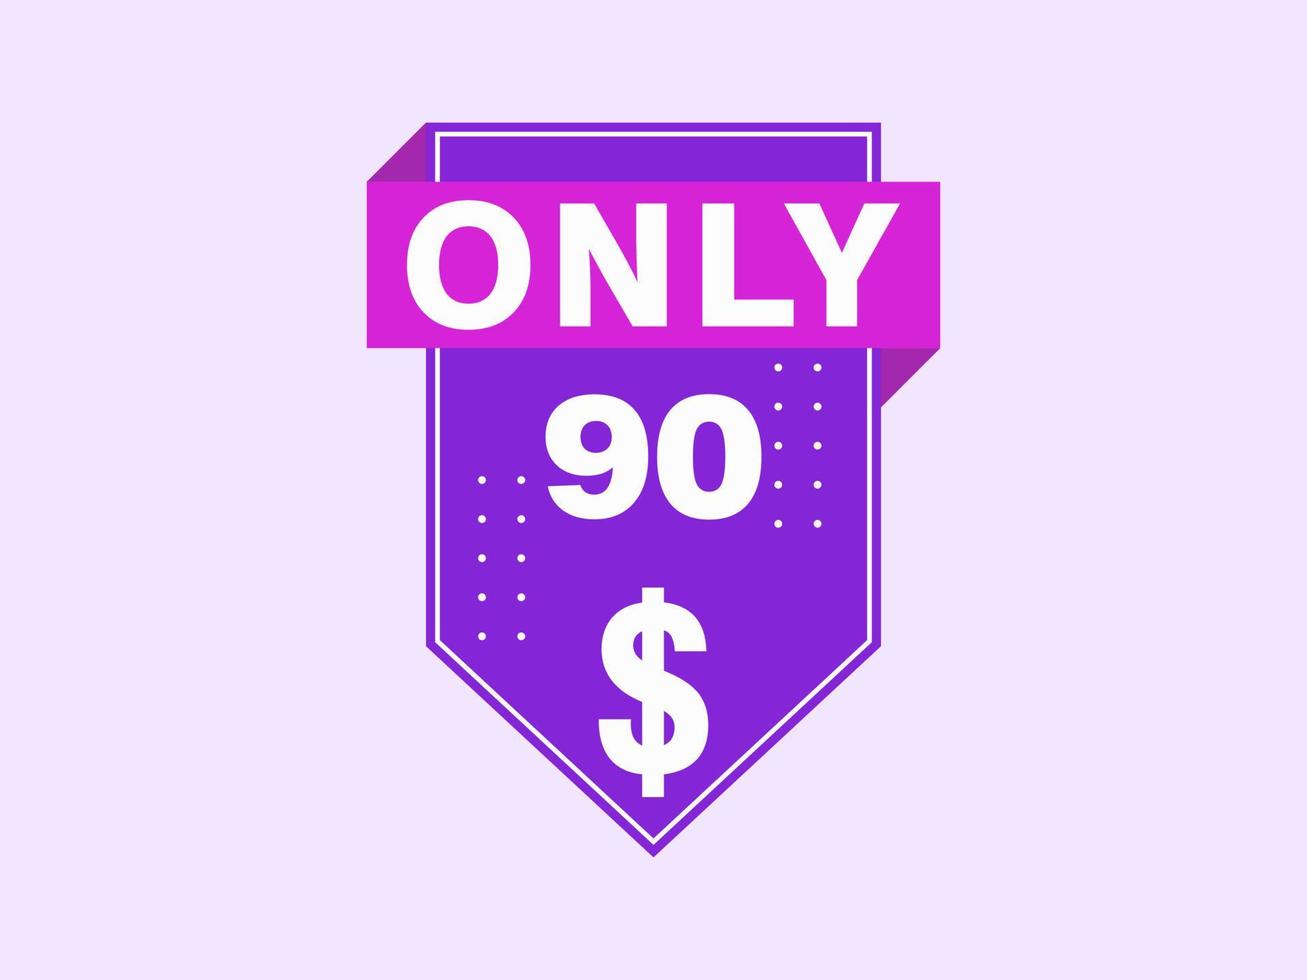 90 Dollar Only Coupon sign or Label or discount voucher Money Saving label, with coupon vector illustration summer offer ends weekend holiday